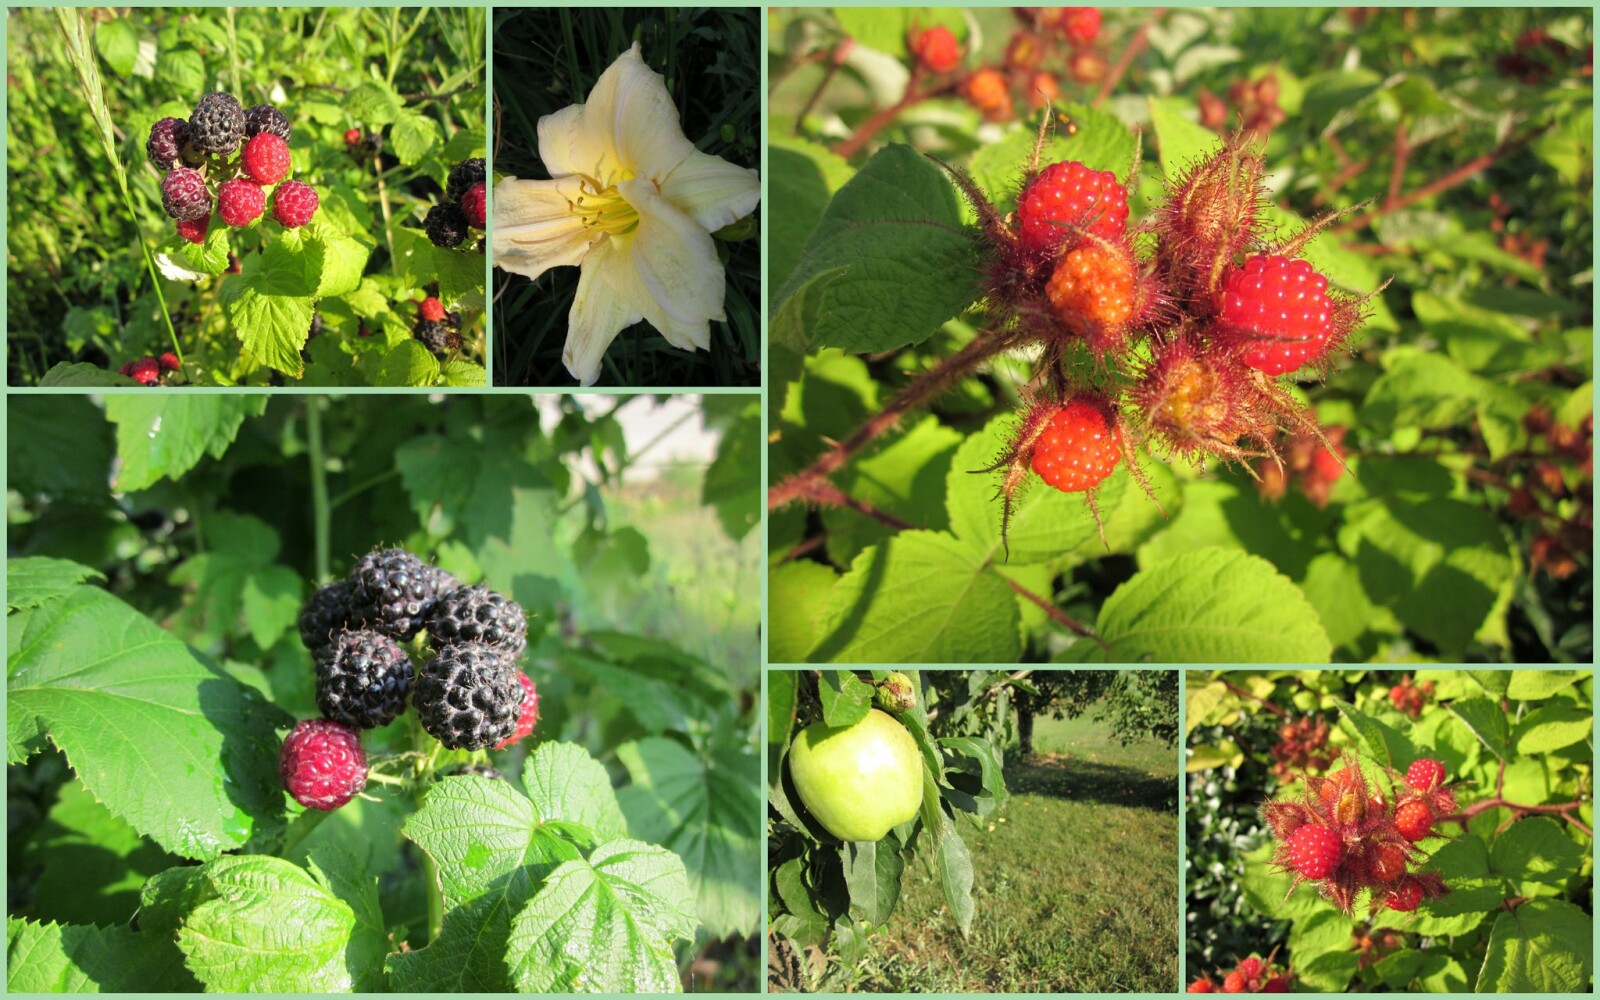 Life Lessons from the Raspberry Patch